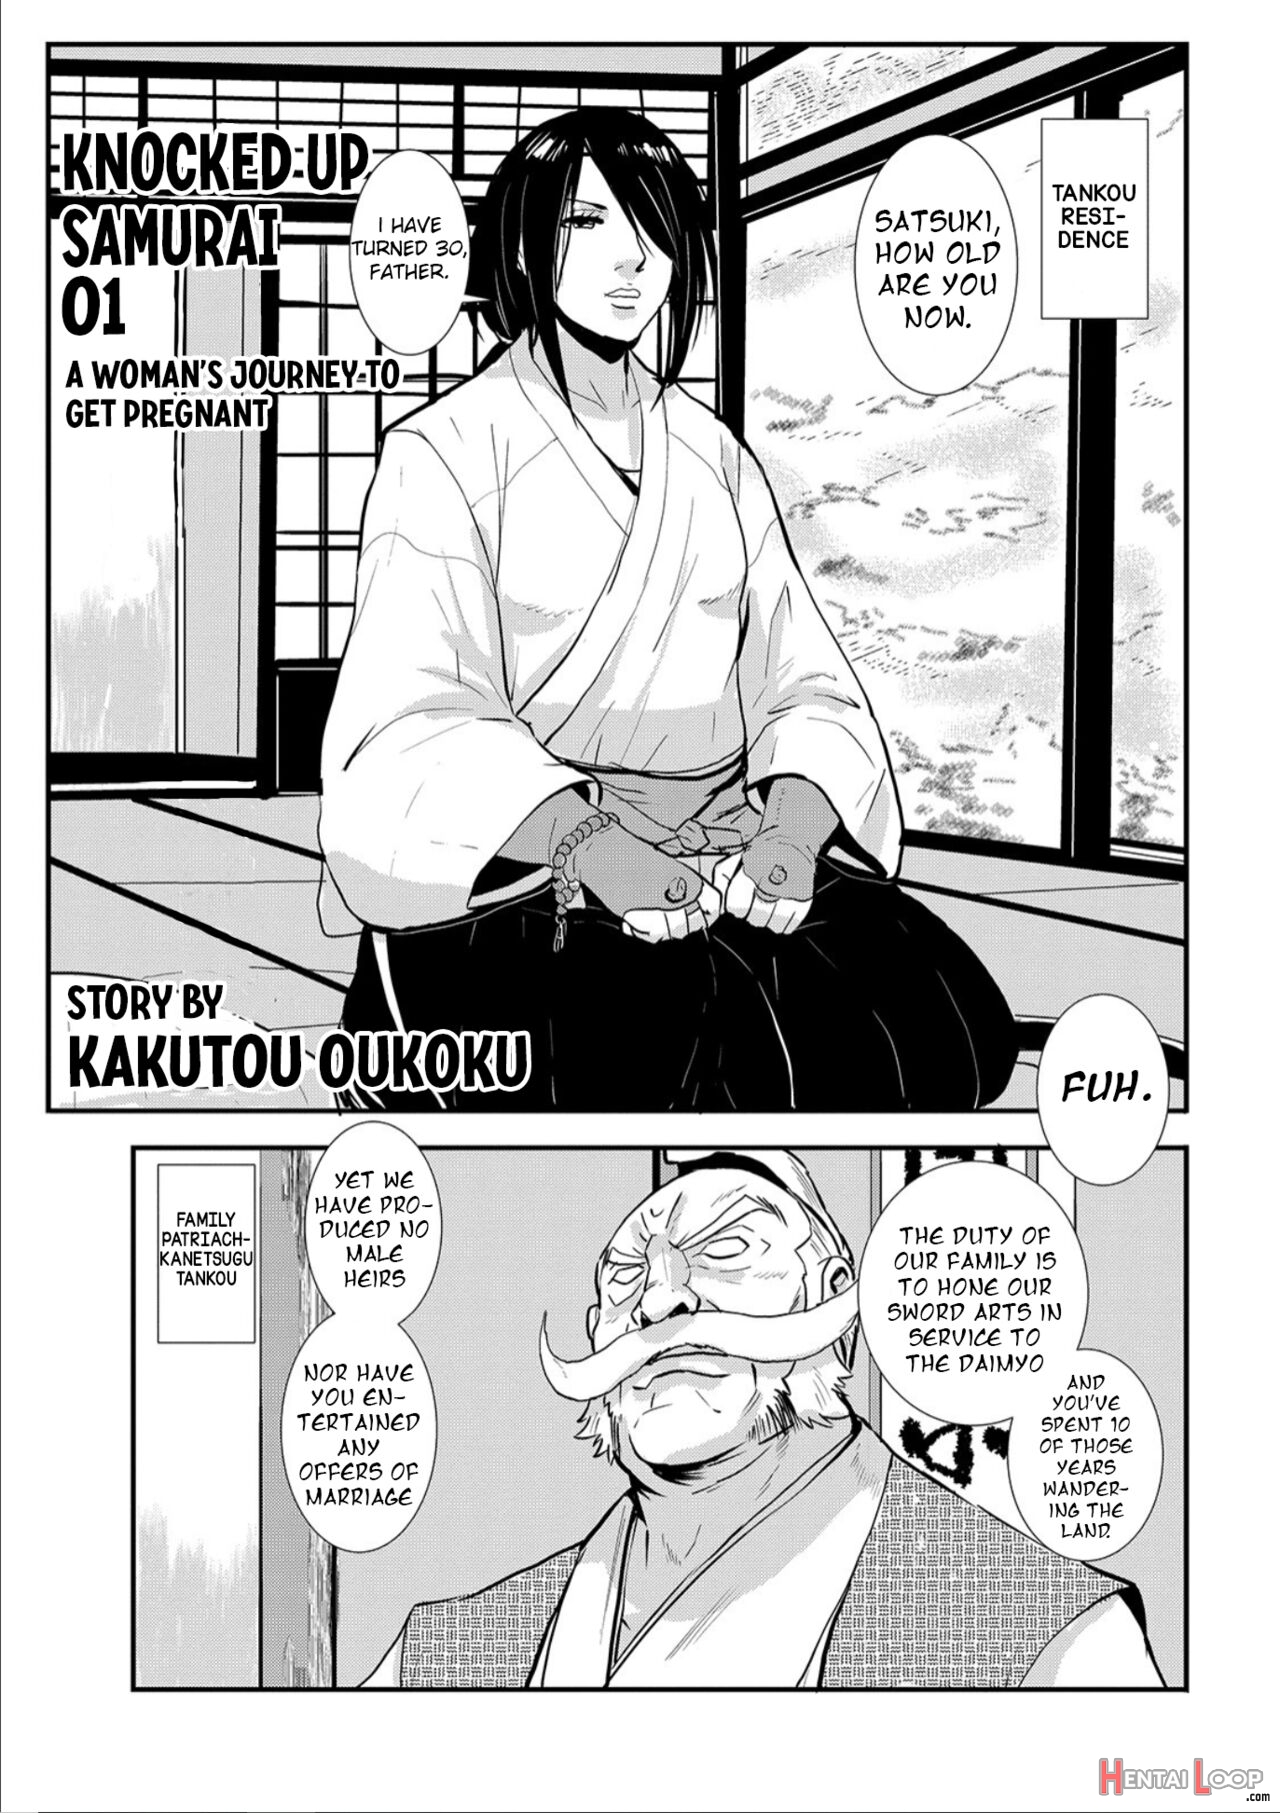 1280px x 1813px - Knocked Up Samurai 01: A Woman's Journey To Get Pregnant (by Kakutou  Oukoku) - Hentai doujinshi for free at HentaiLoop